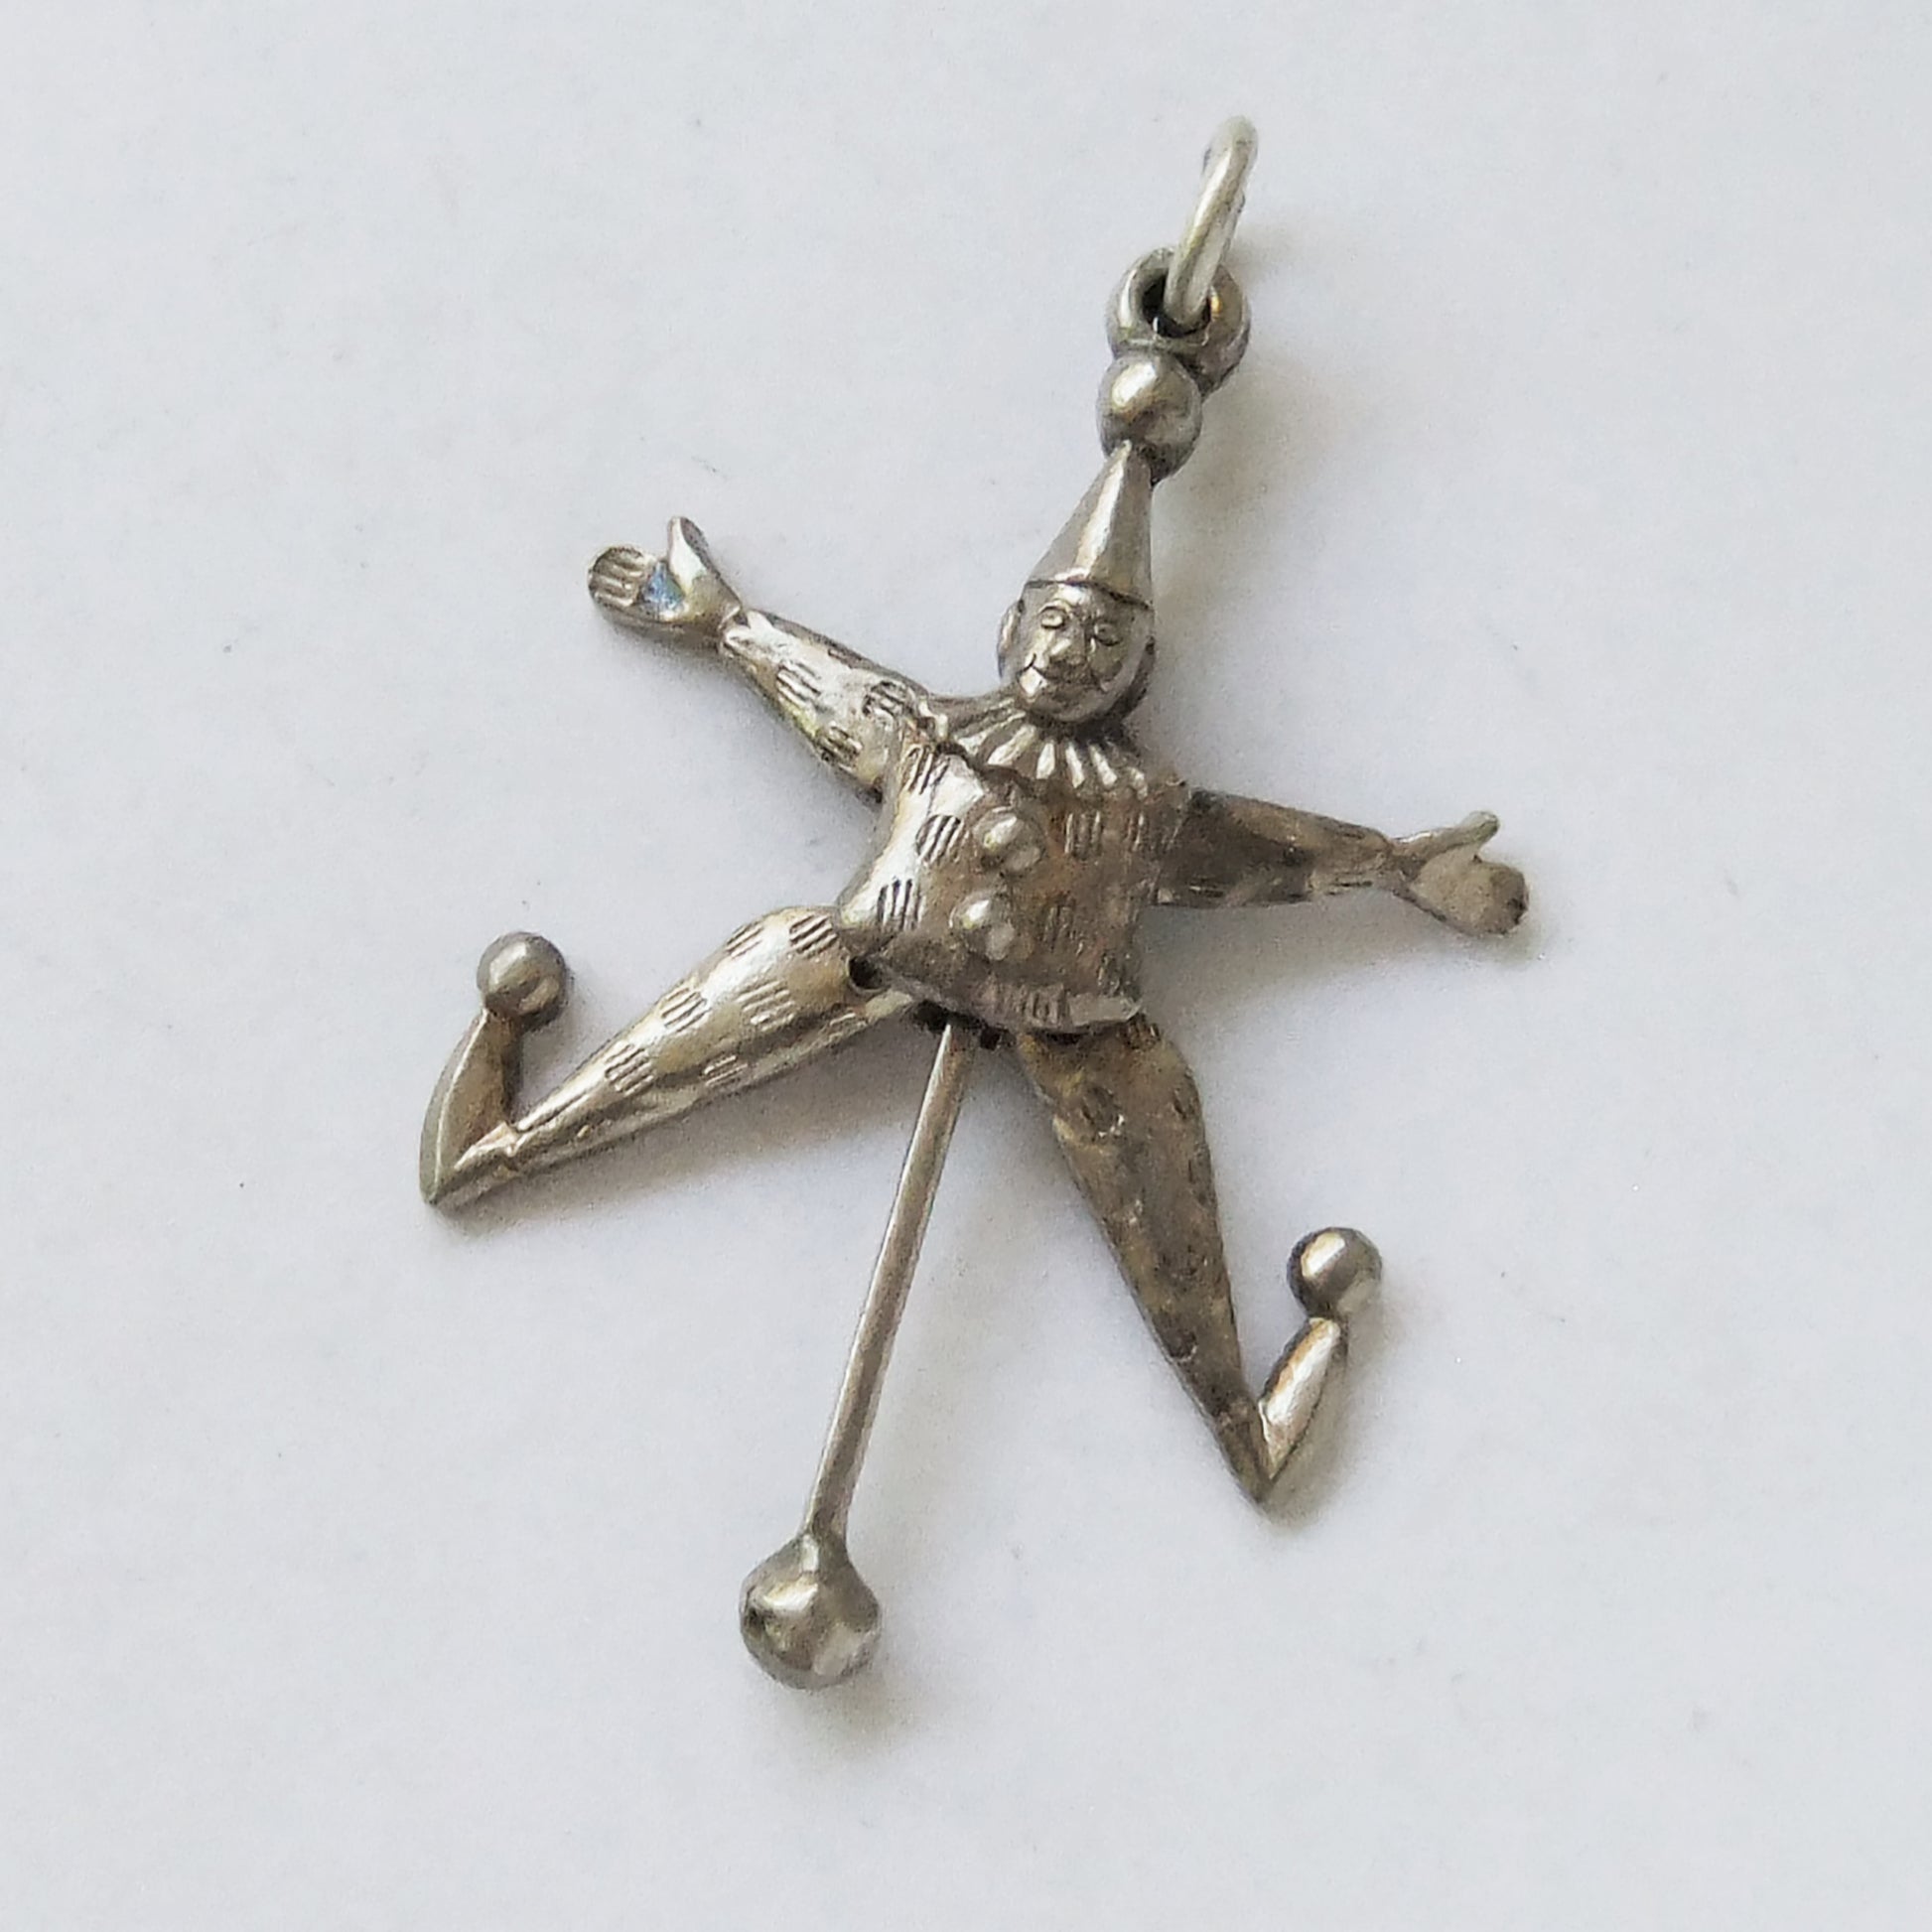 Antique moving jester charm silver